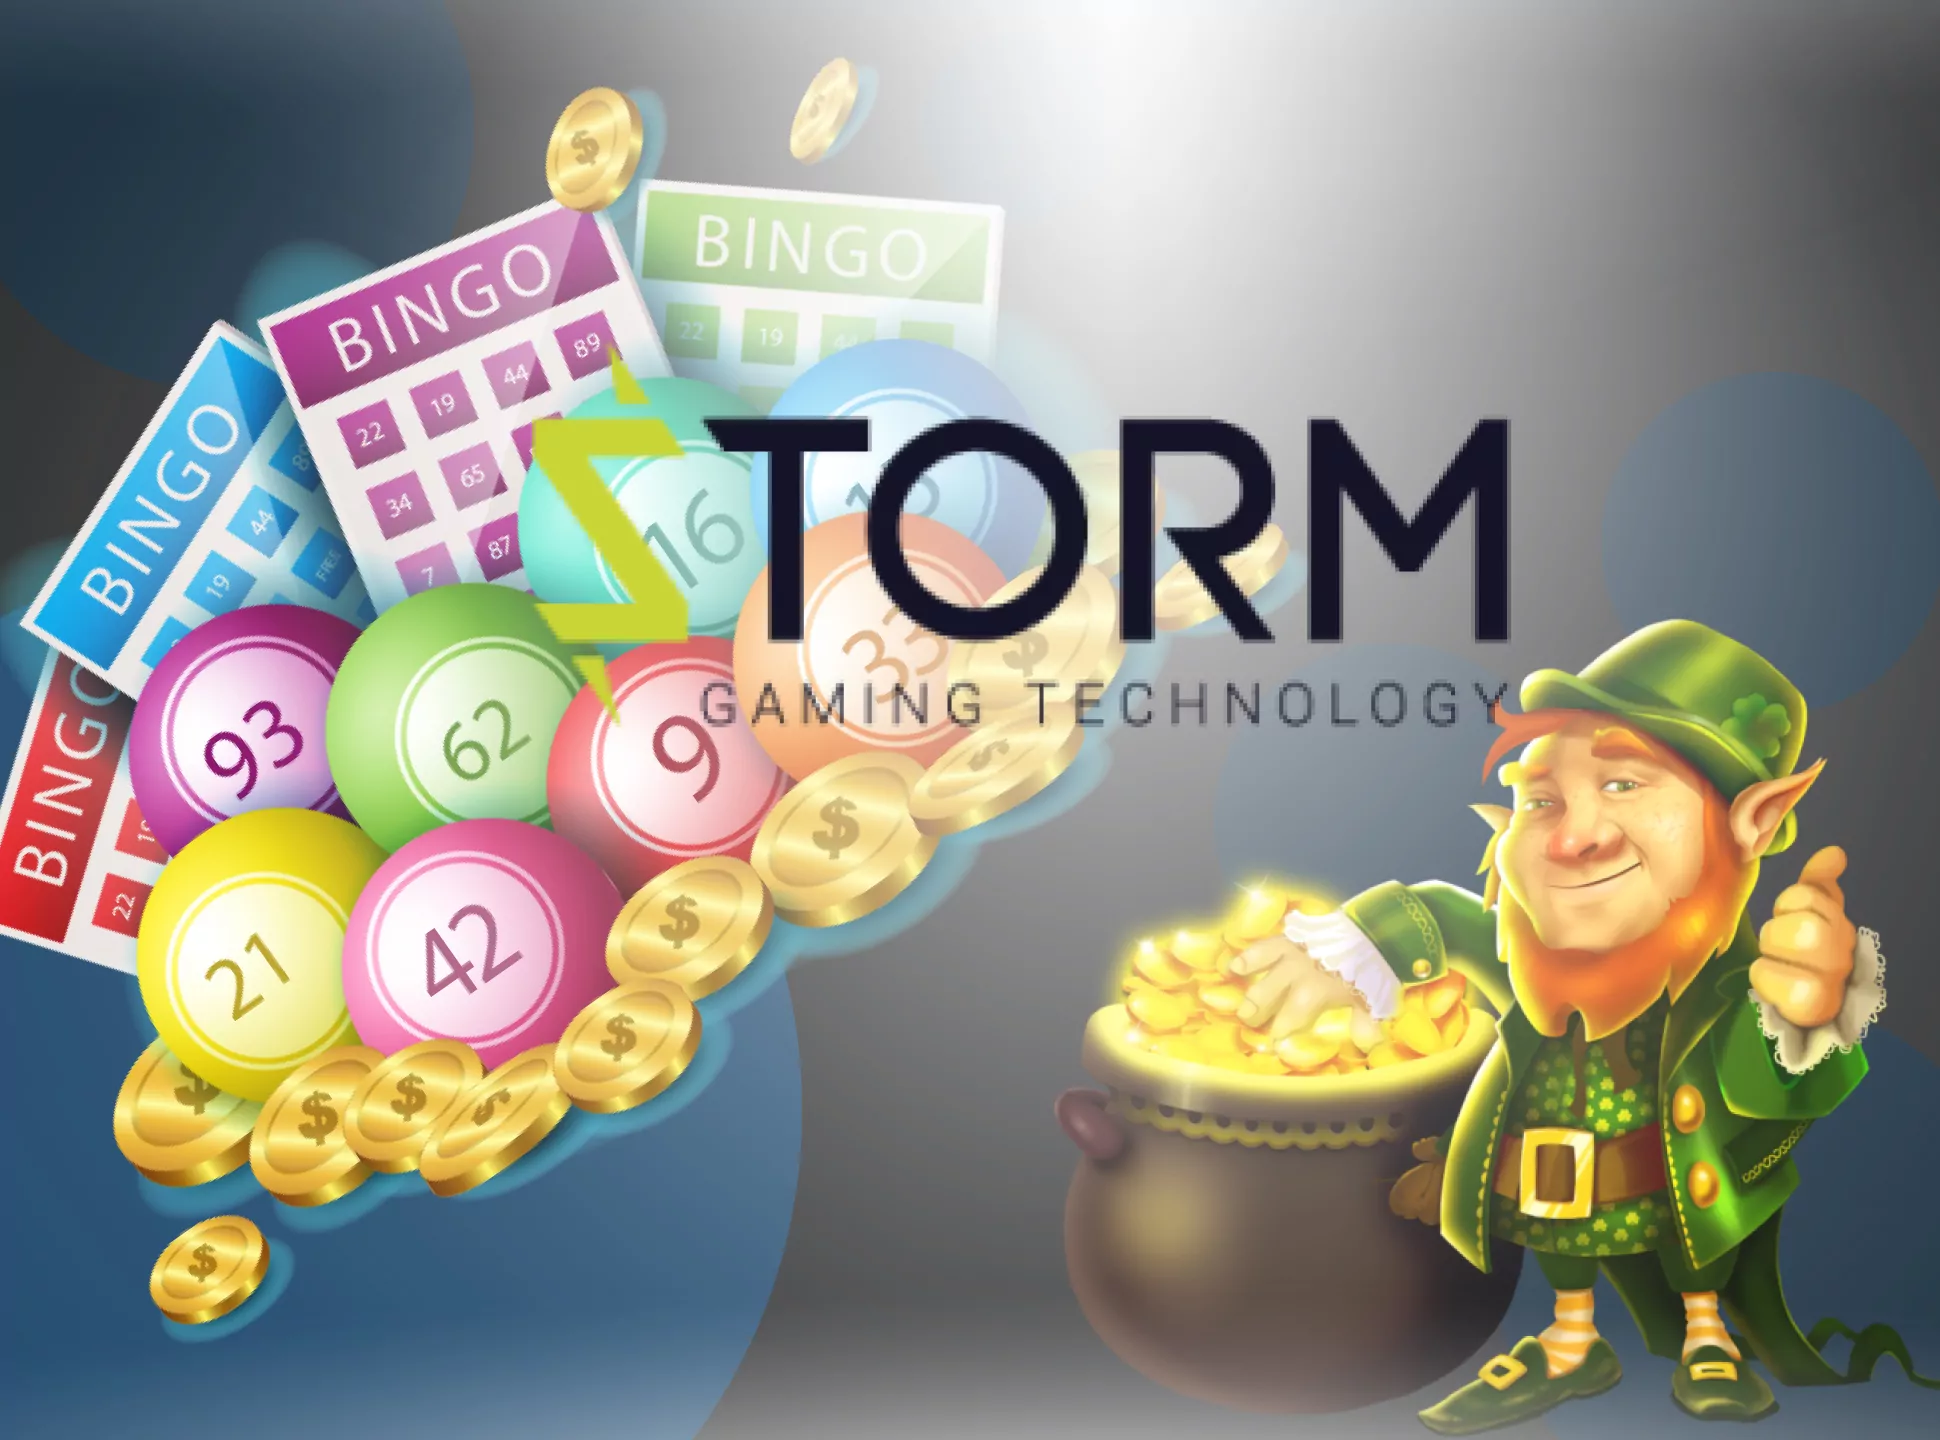 Storm Gaming is a well-known game provider.